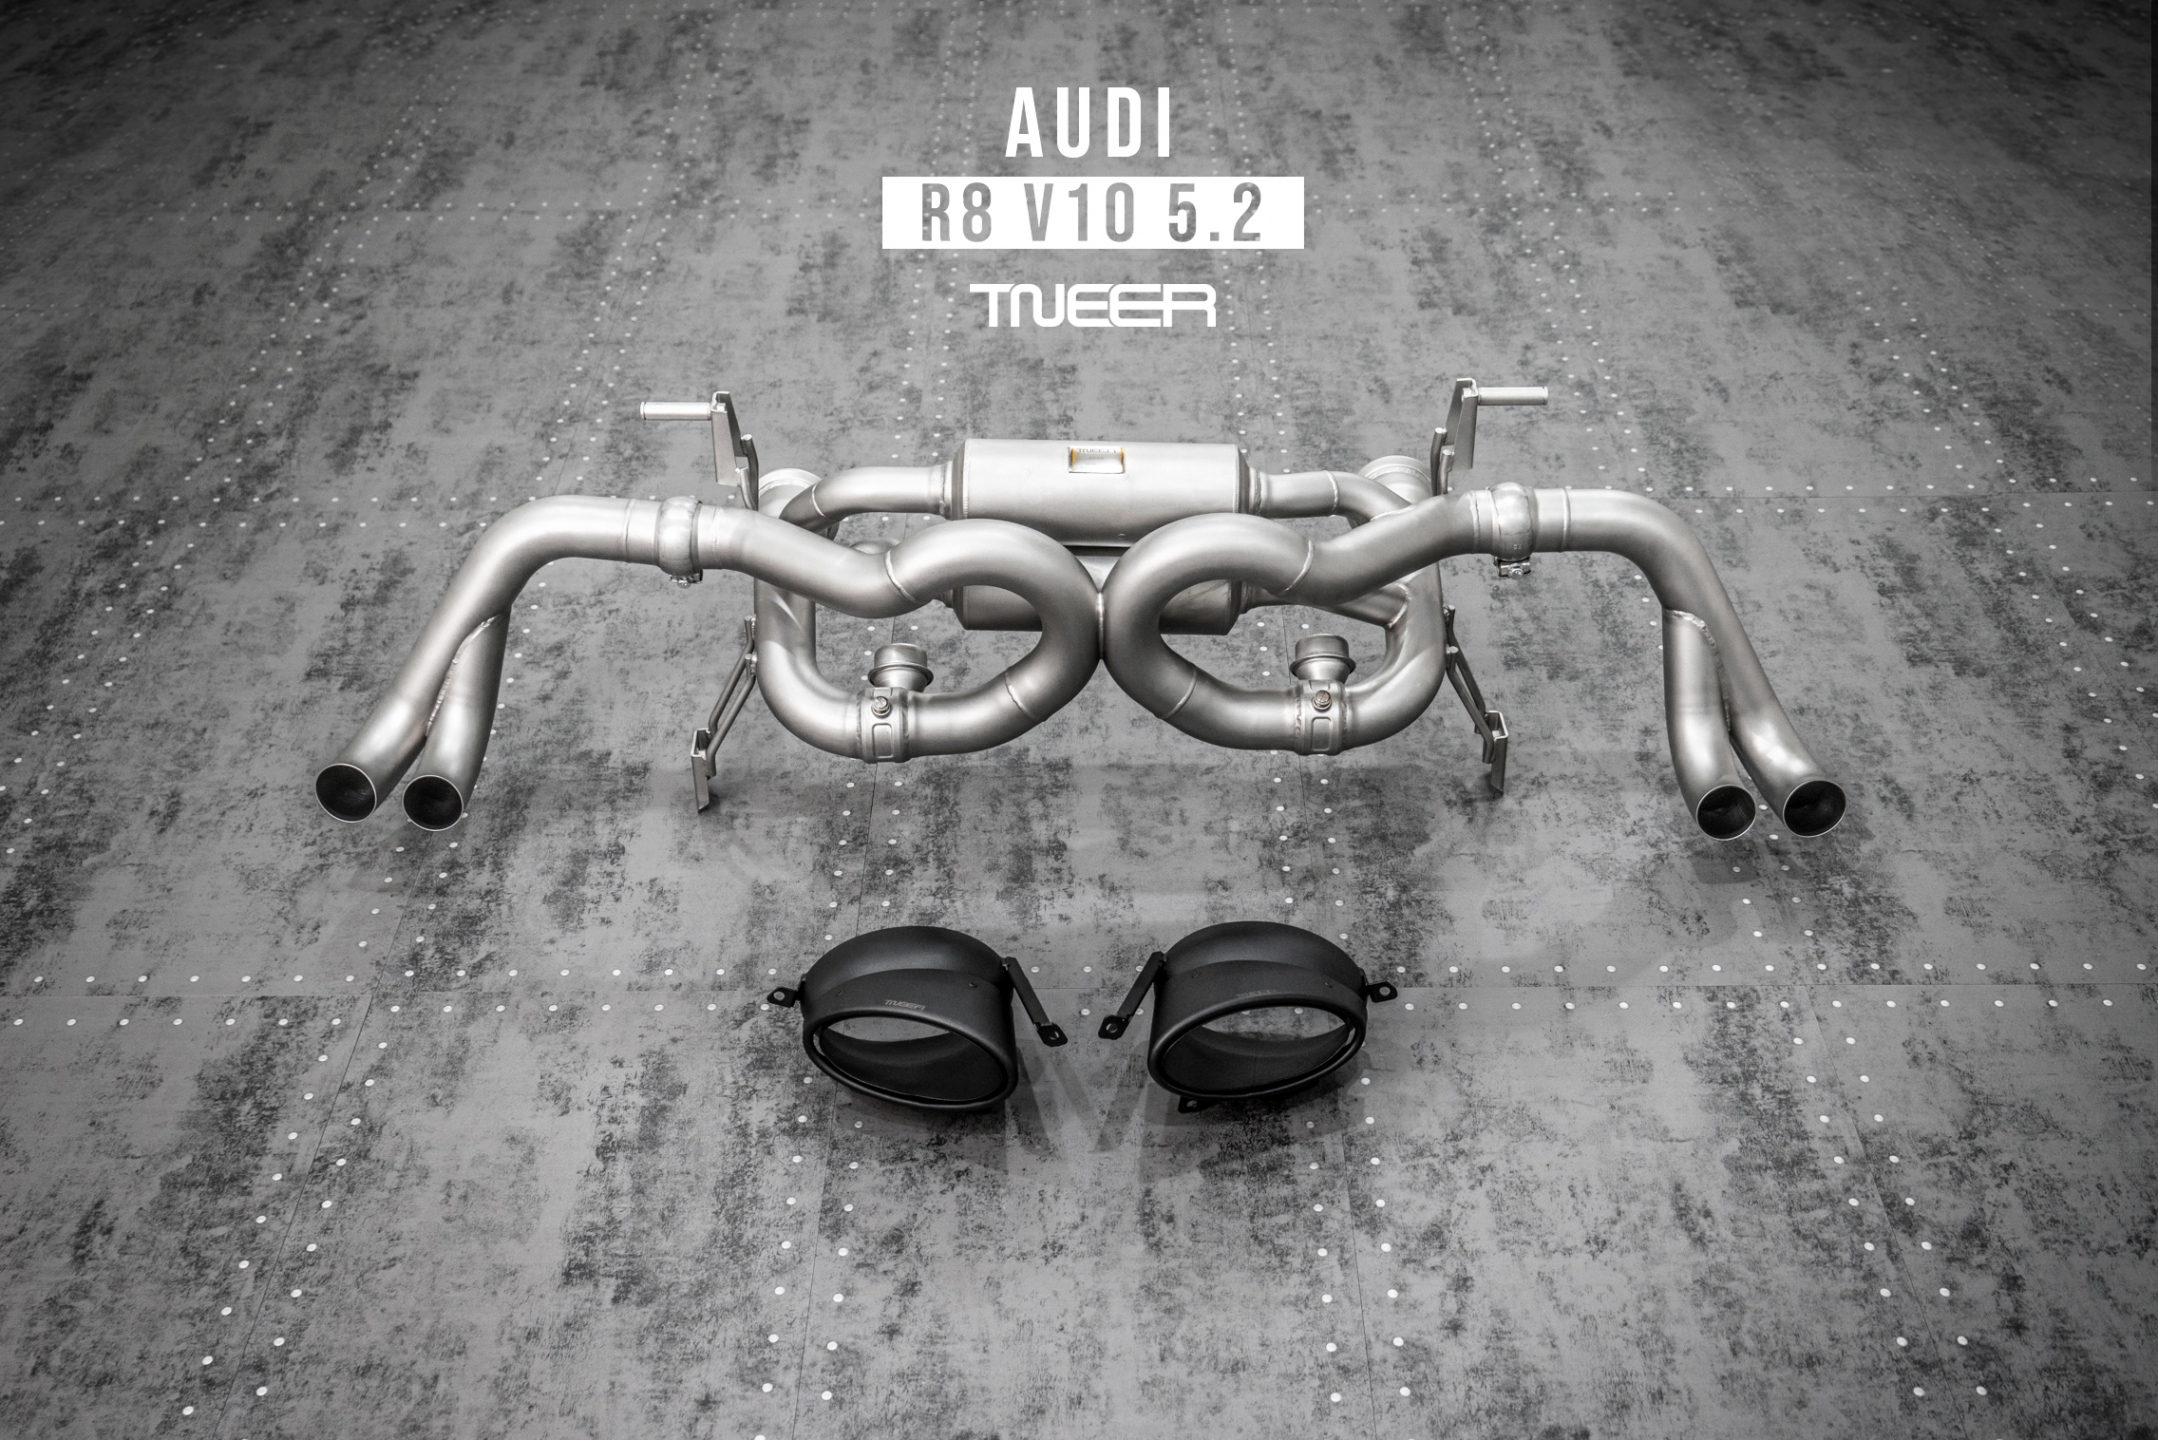 Audi RS3 (8V.2) Sportback 2.5 TFSI TNEER Exhaust System with TACS